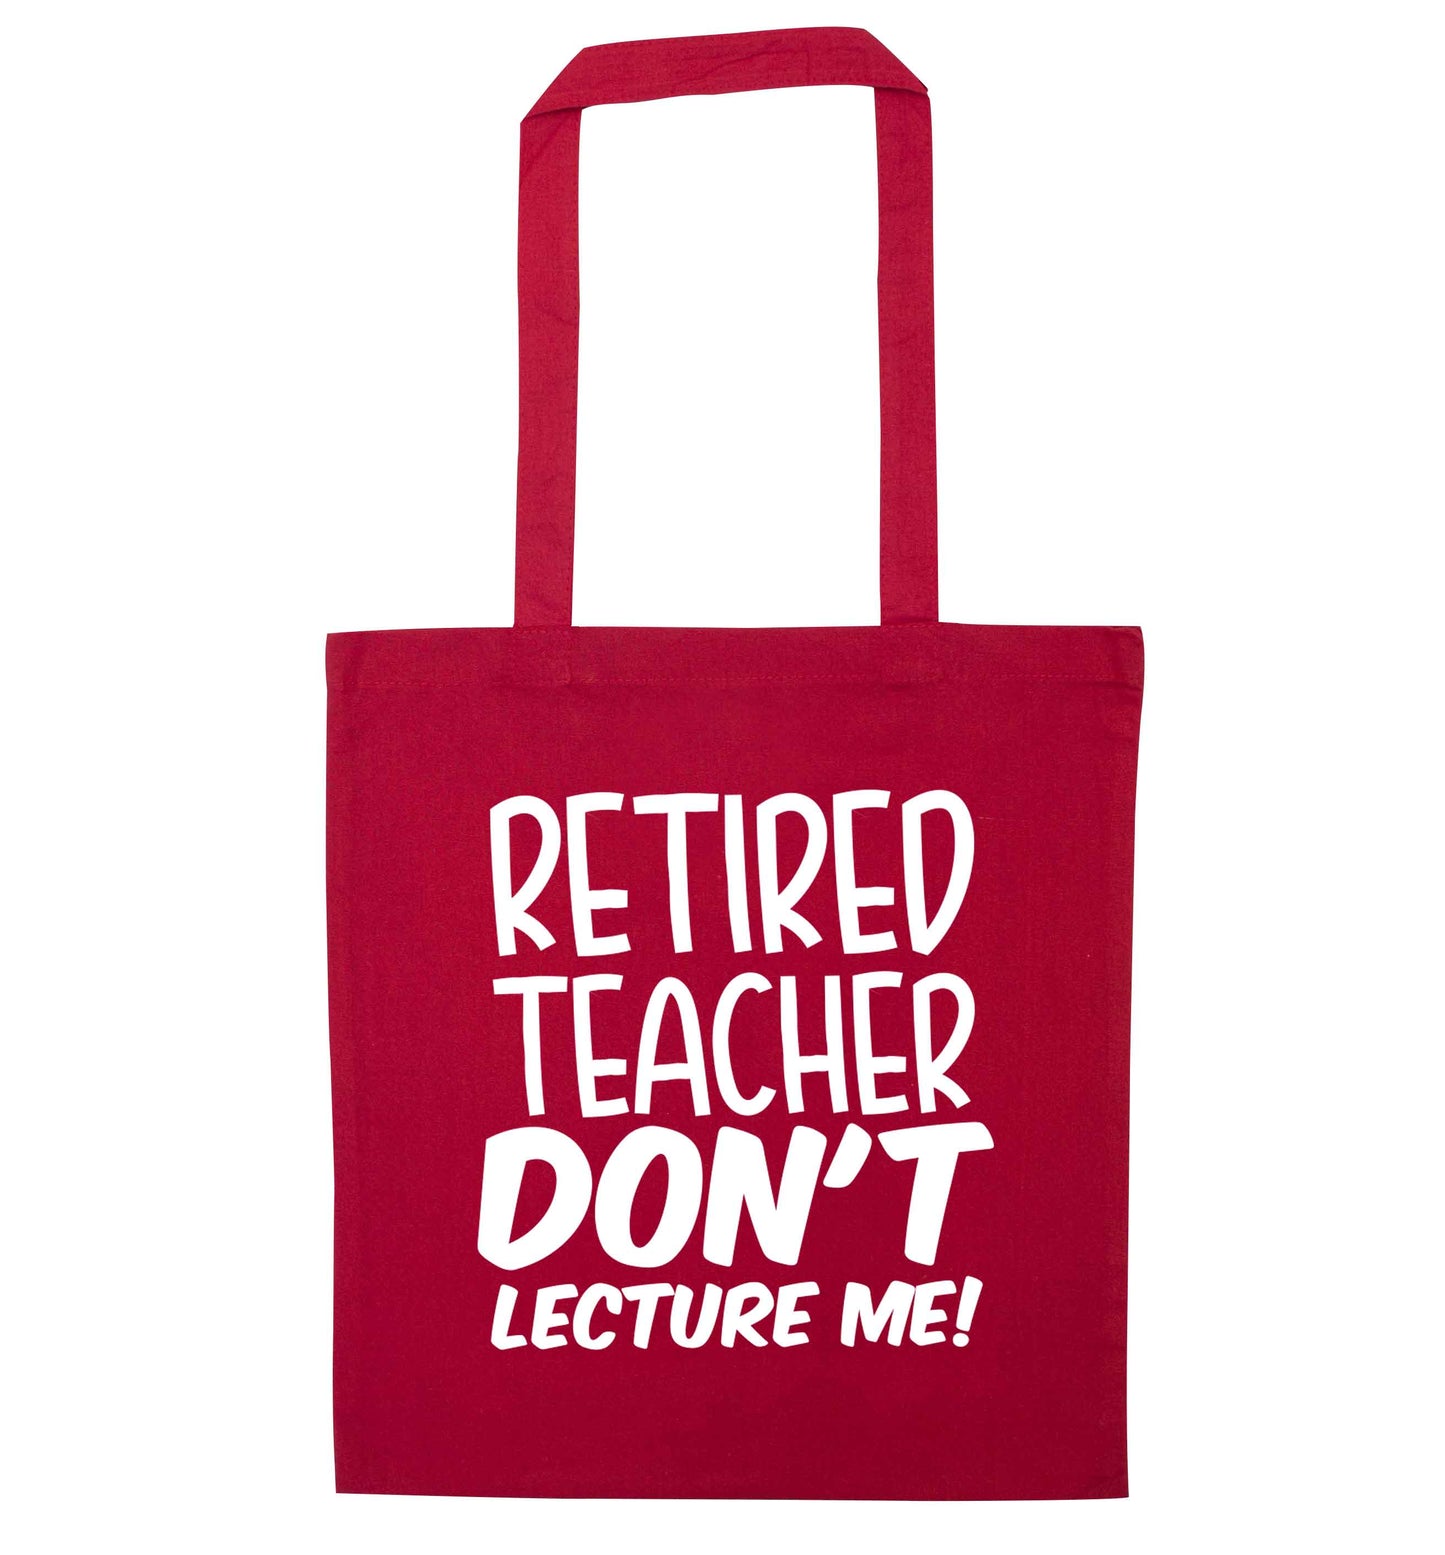 Retired teacher don't lecture me! red tote bag